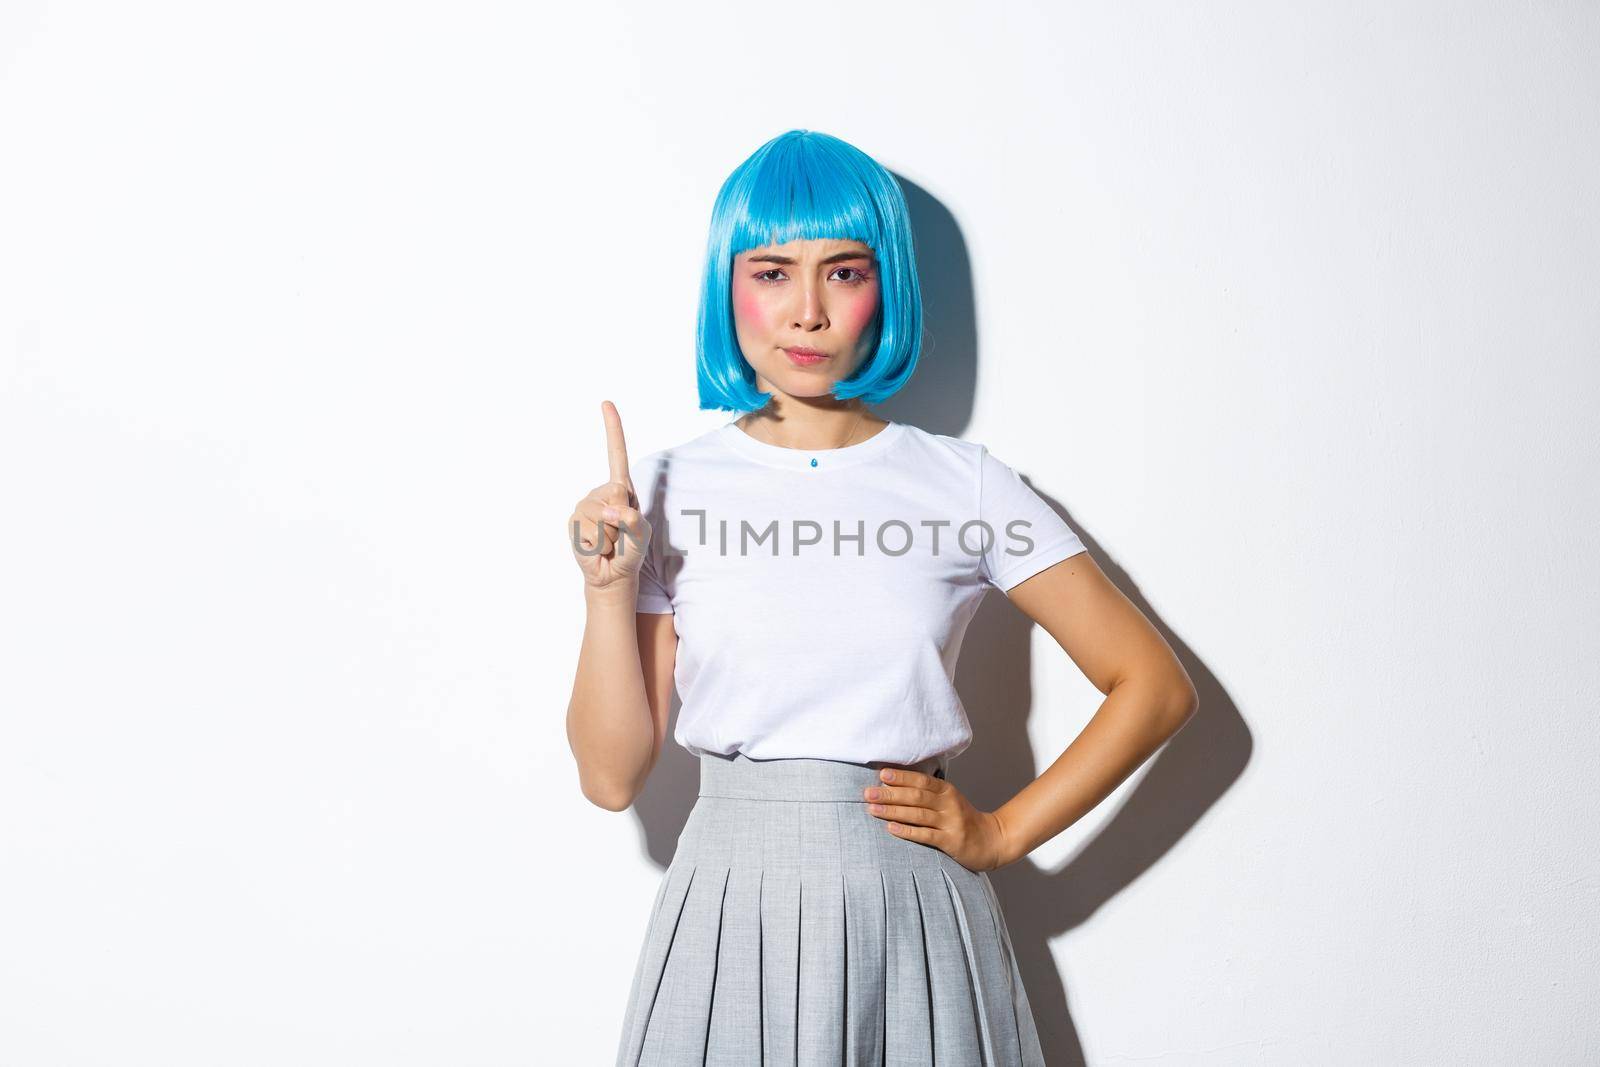 Portrait of serious asian girl in blue party wig looking disappointed, shaking finger and scolding someone bad behaviour, standing over white background.